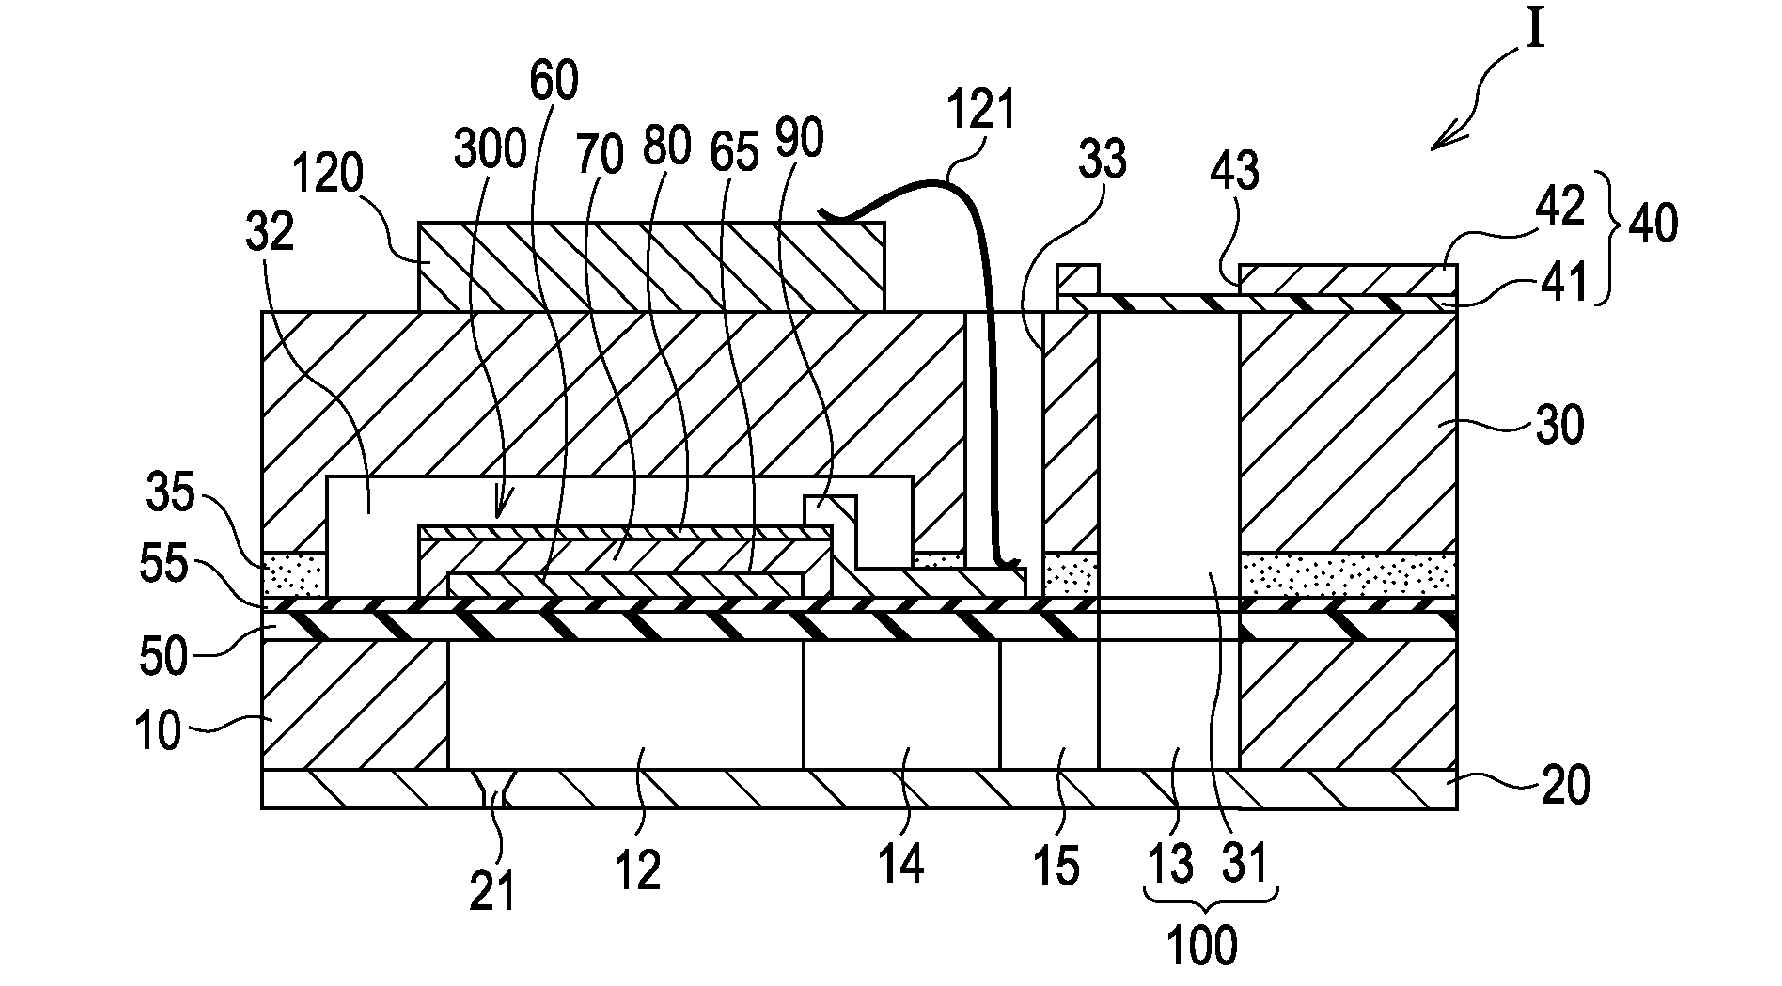 Liquid ejecting head, liquid ejecting apparatus, and piezoelectric element